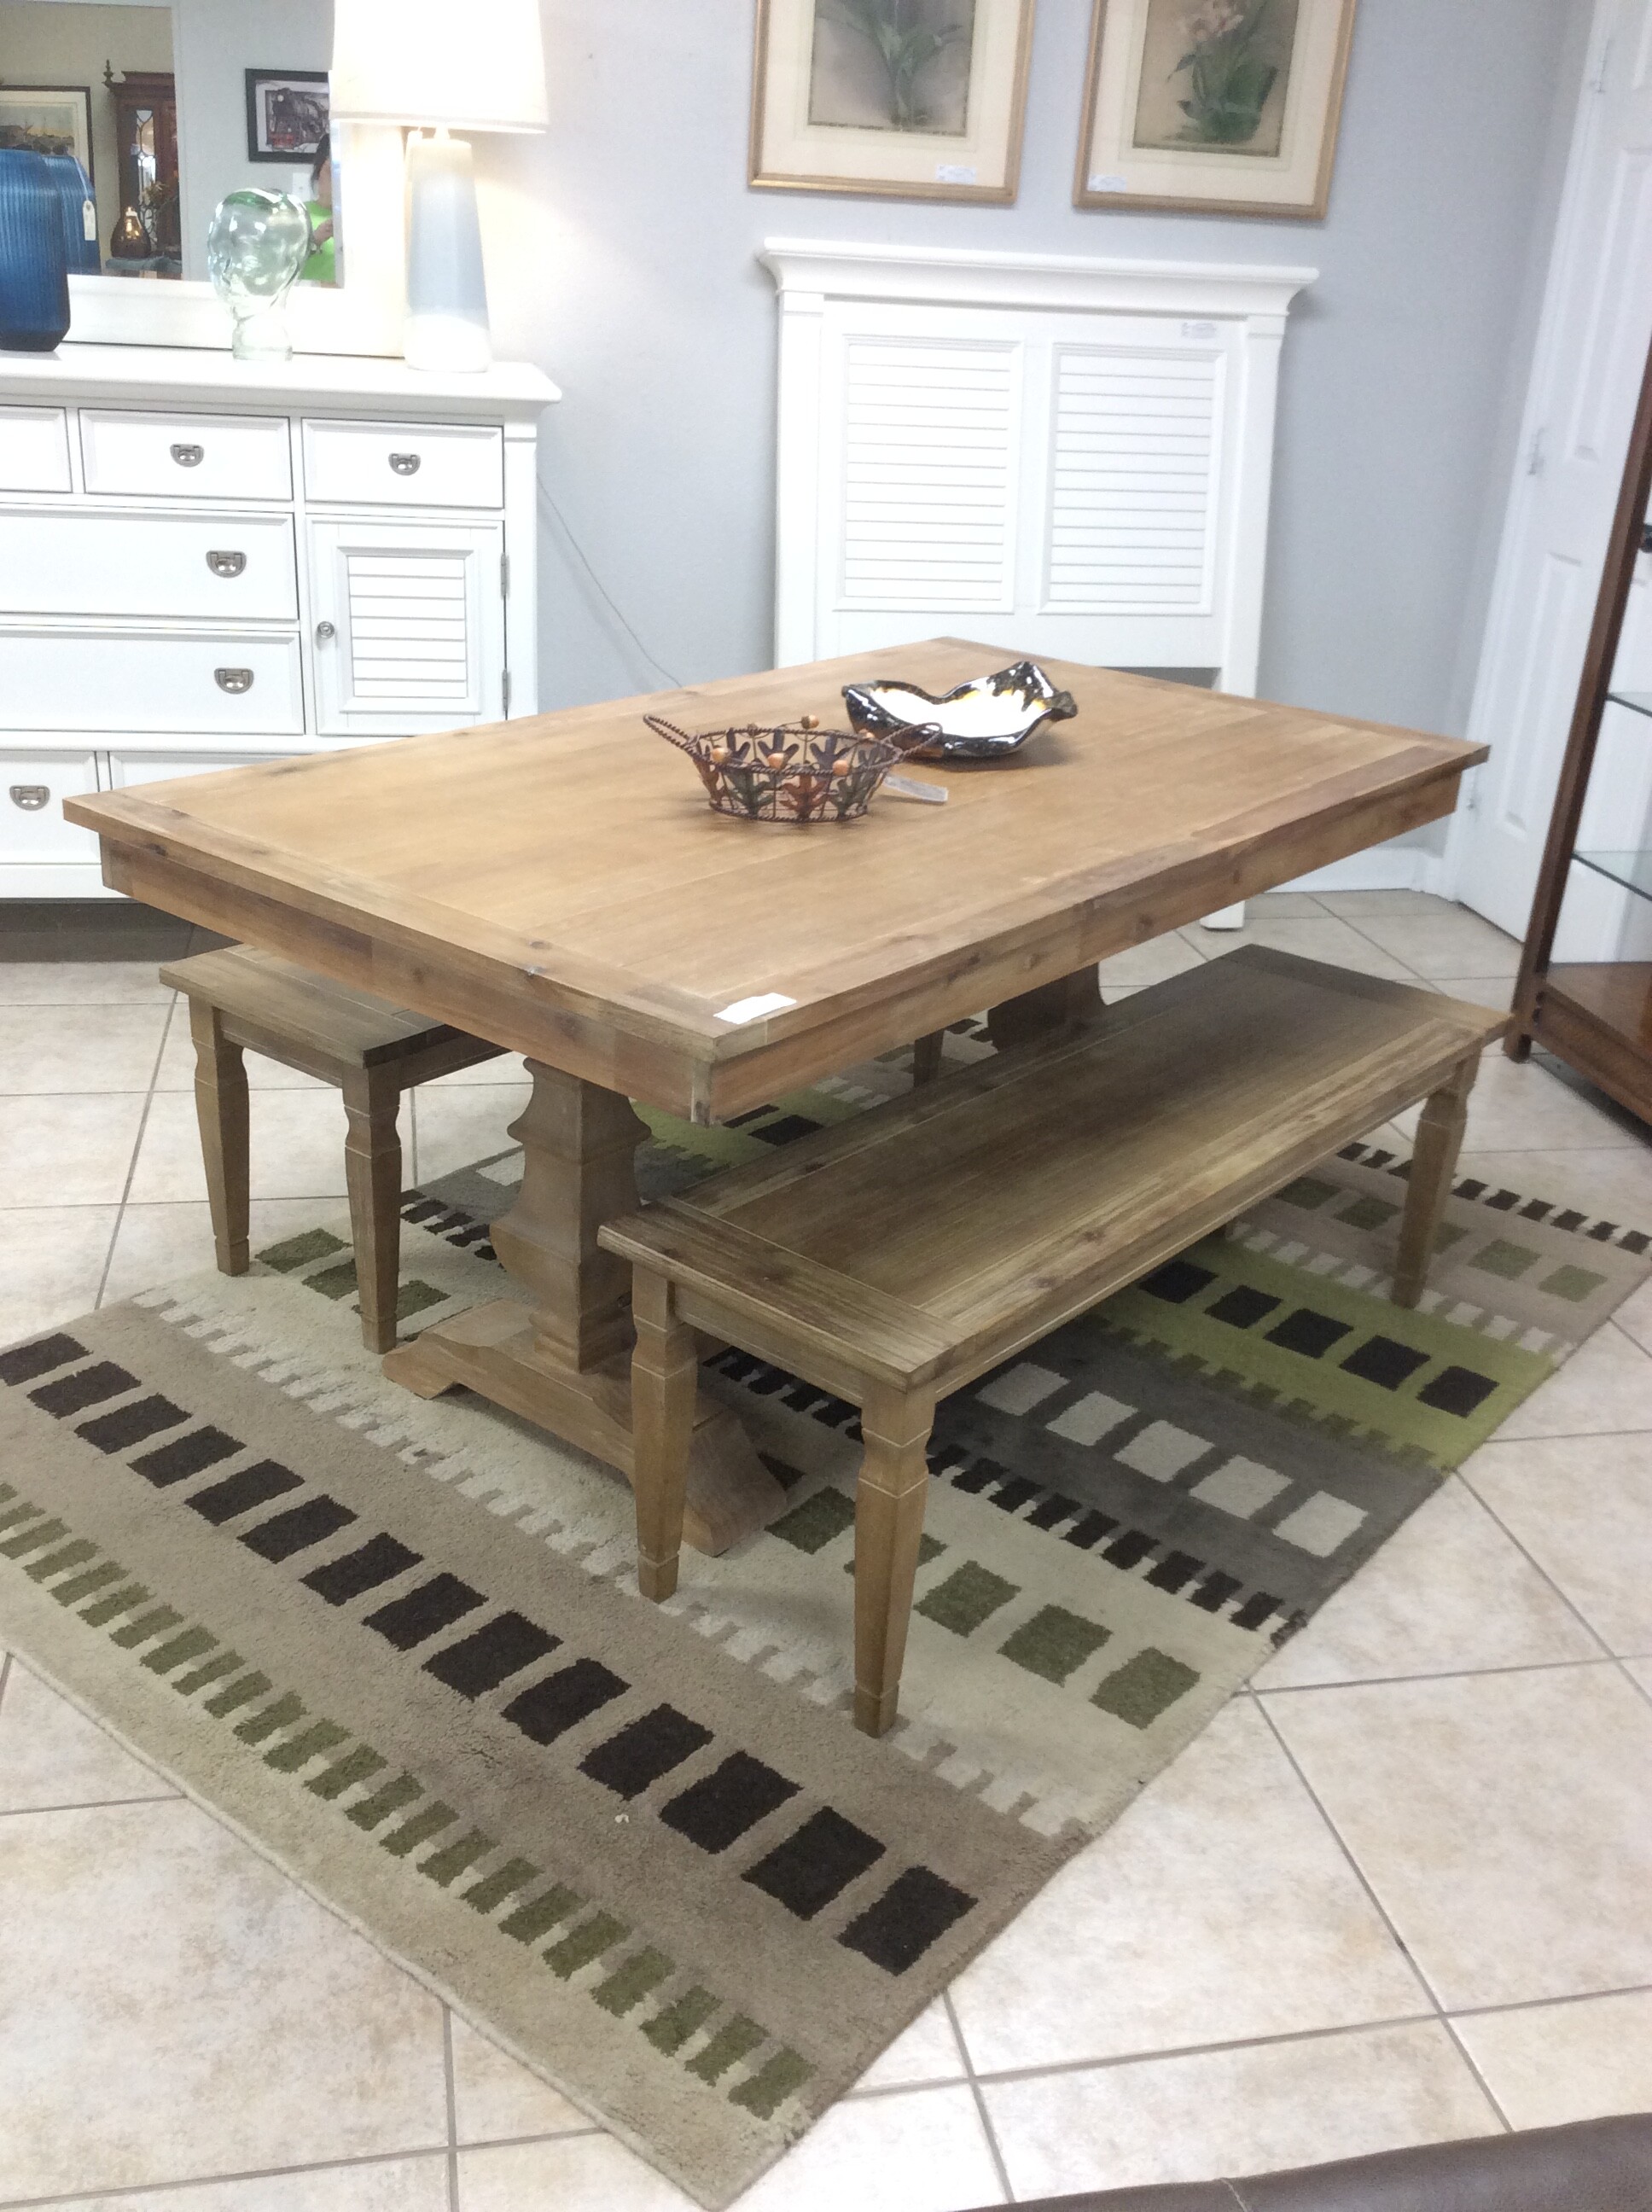 This is a beautiful, rustic, Pier 1 trestle table with 2 benches.